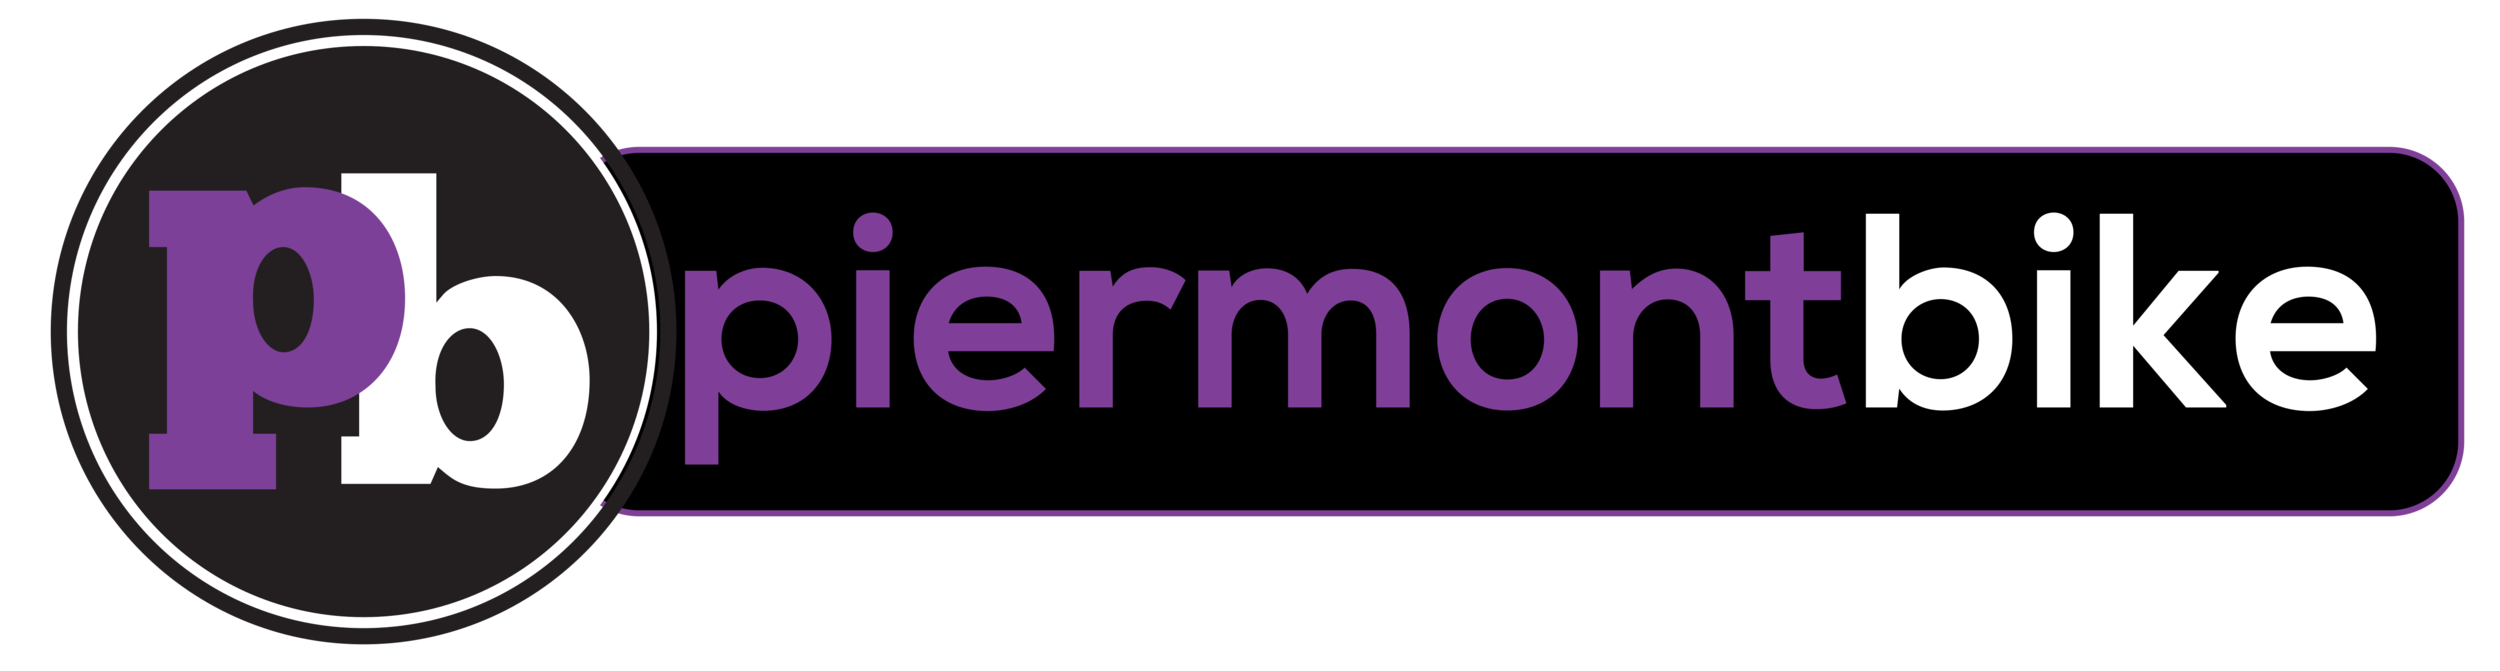 PiermontBike Logo.png